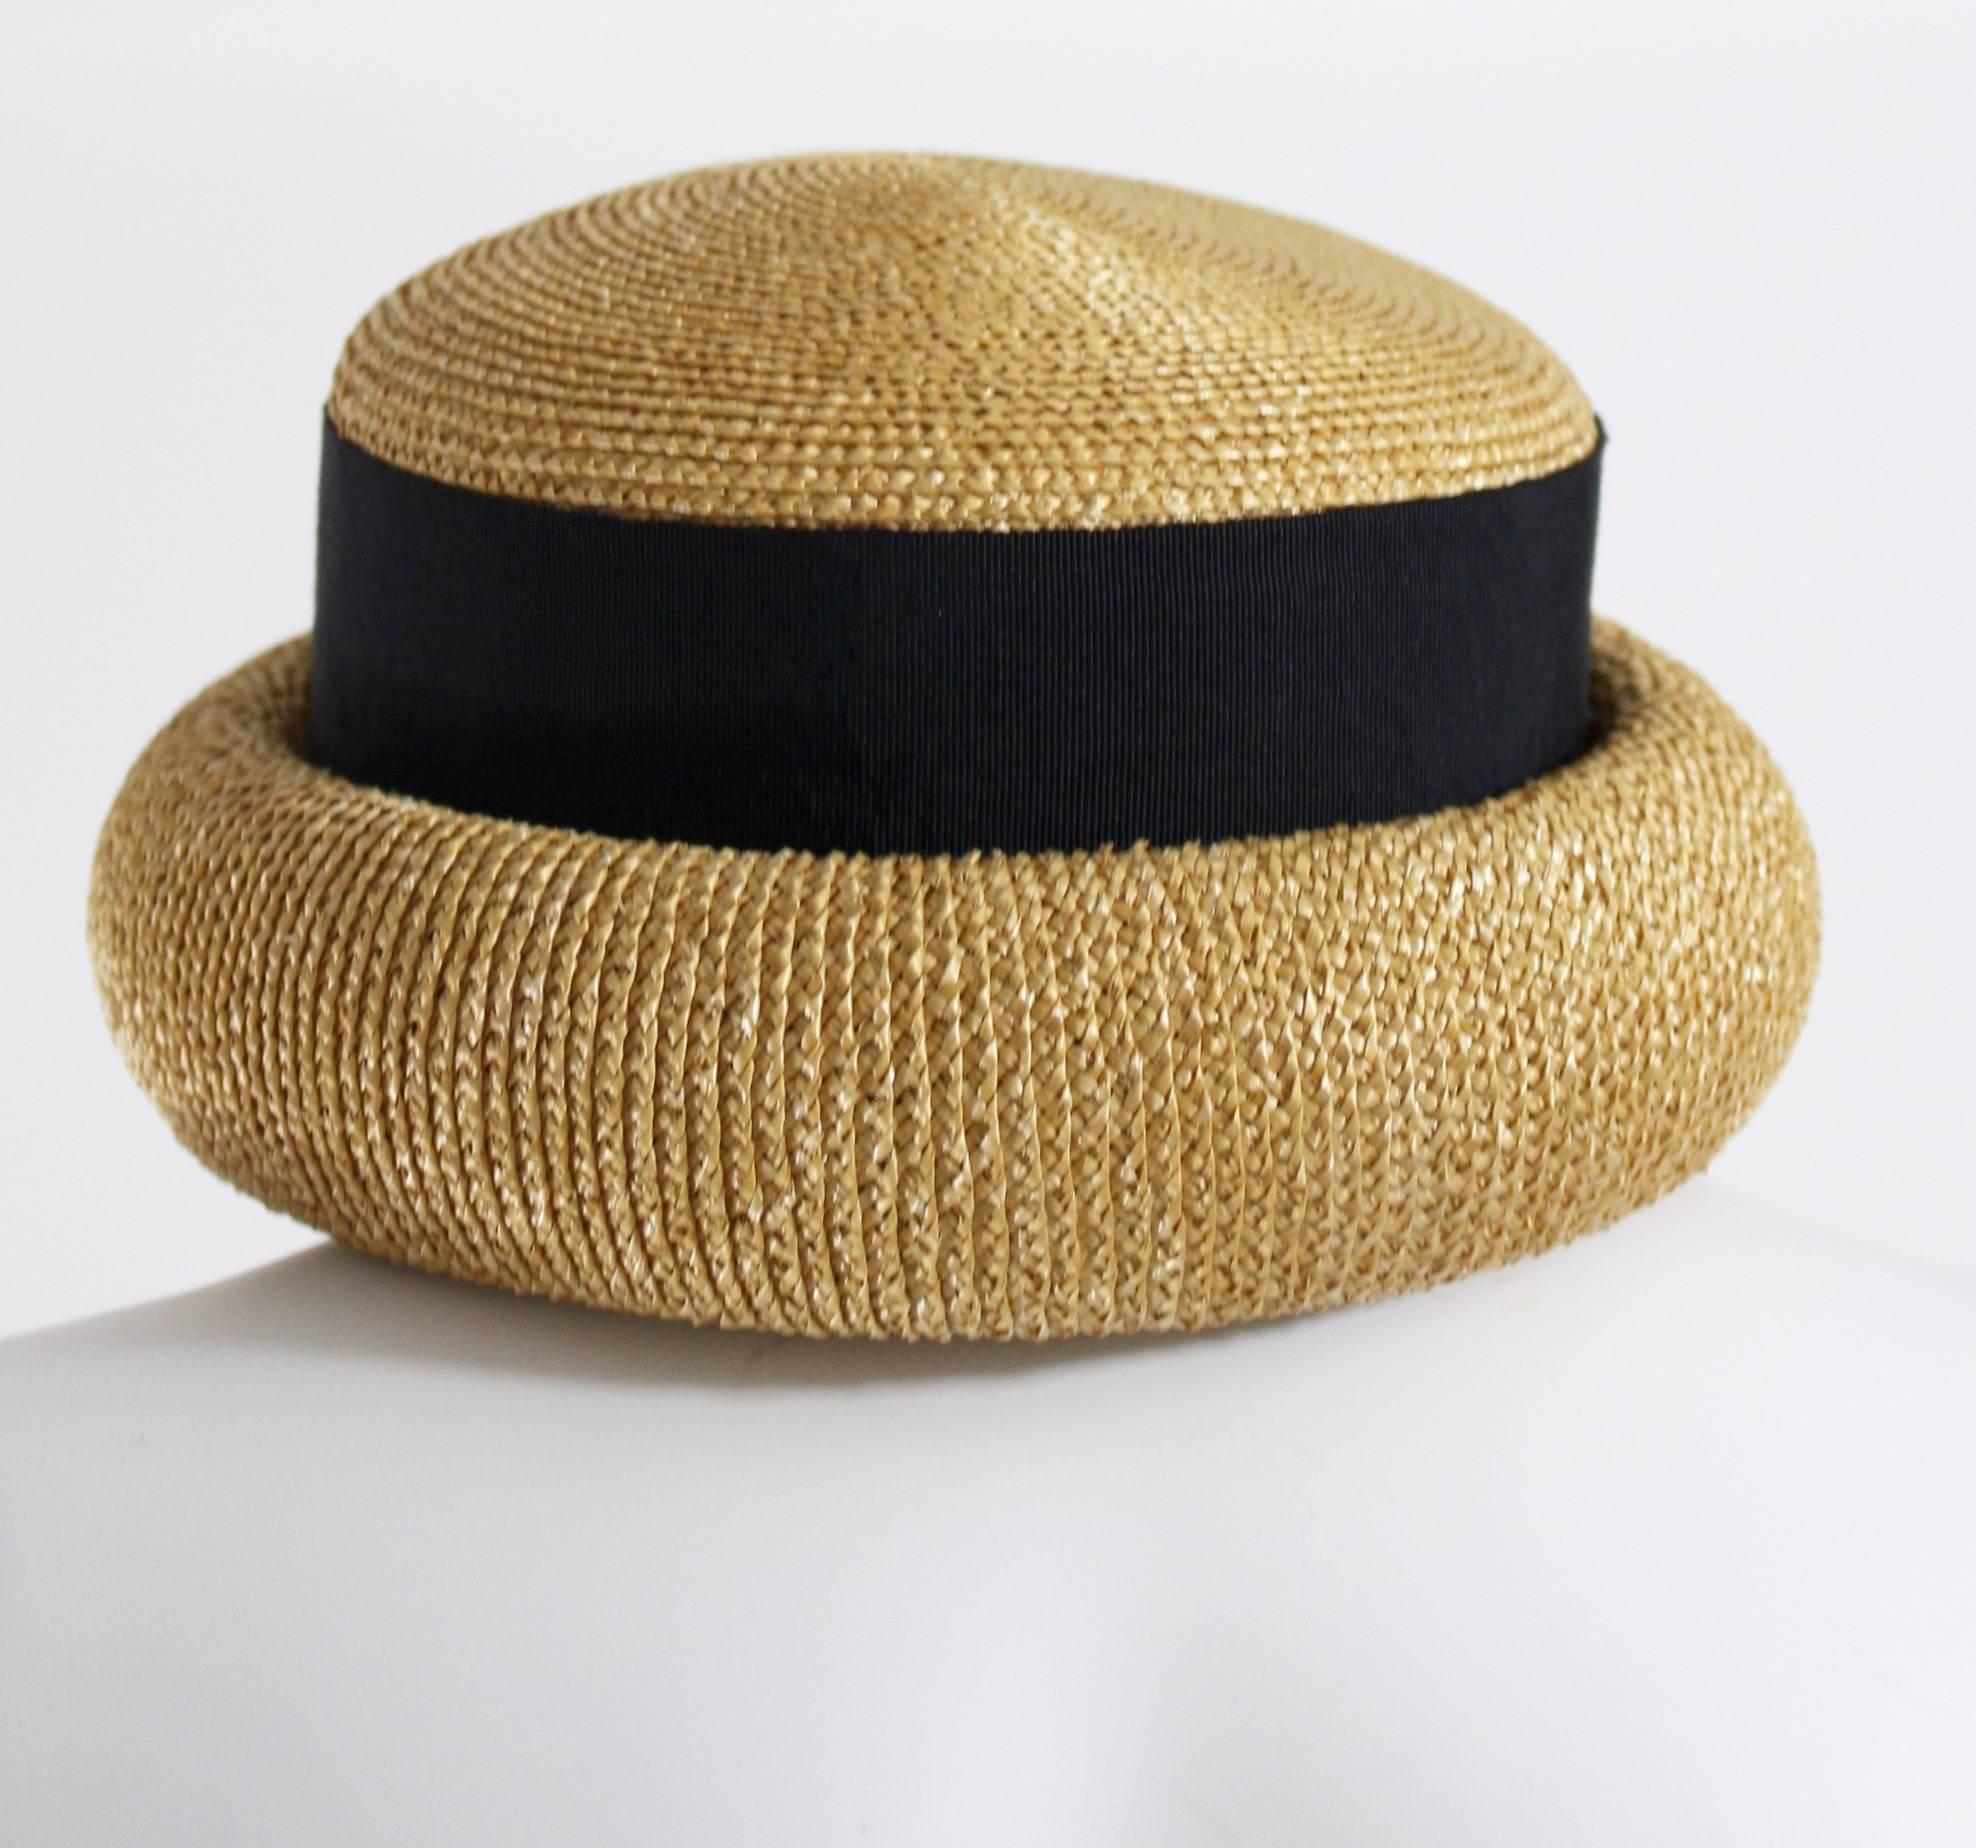 A chic Chanel woven straw hat with a black wide grosgrain ribbon band.
The brim is rolled. Marked a size 57
Measurements:
Inside Circumference: 21 inches
Height of Crown 4 inches